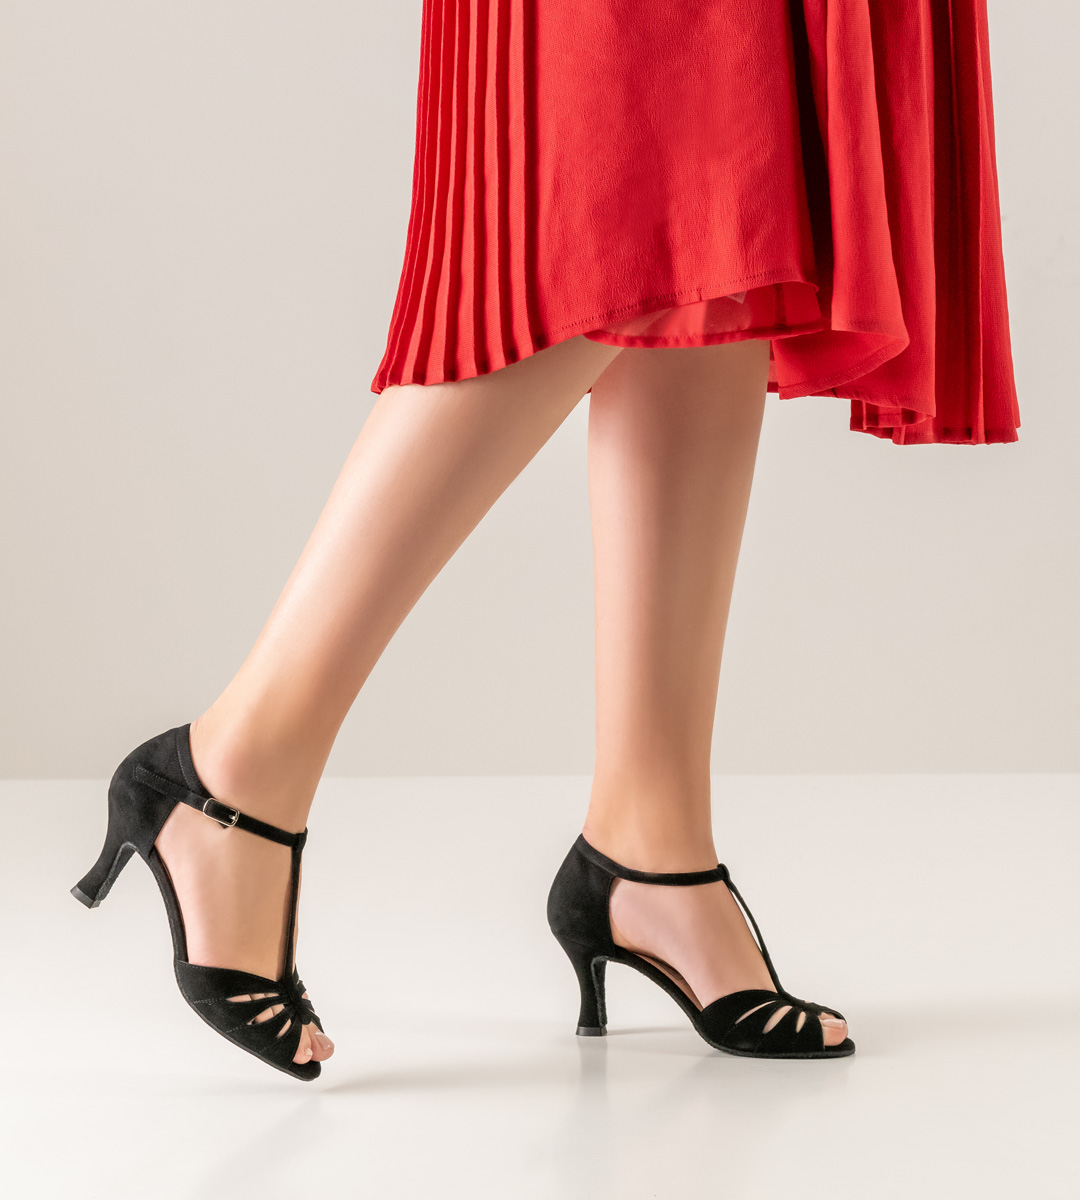 Werner Kern T -bar ladies' dance shoe in combination with red pleated skirt